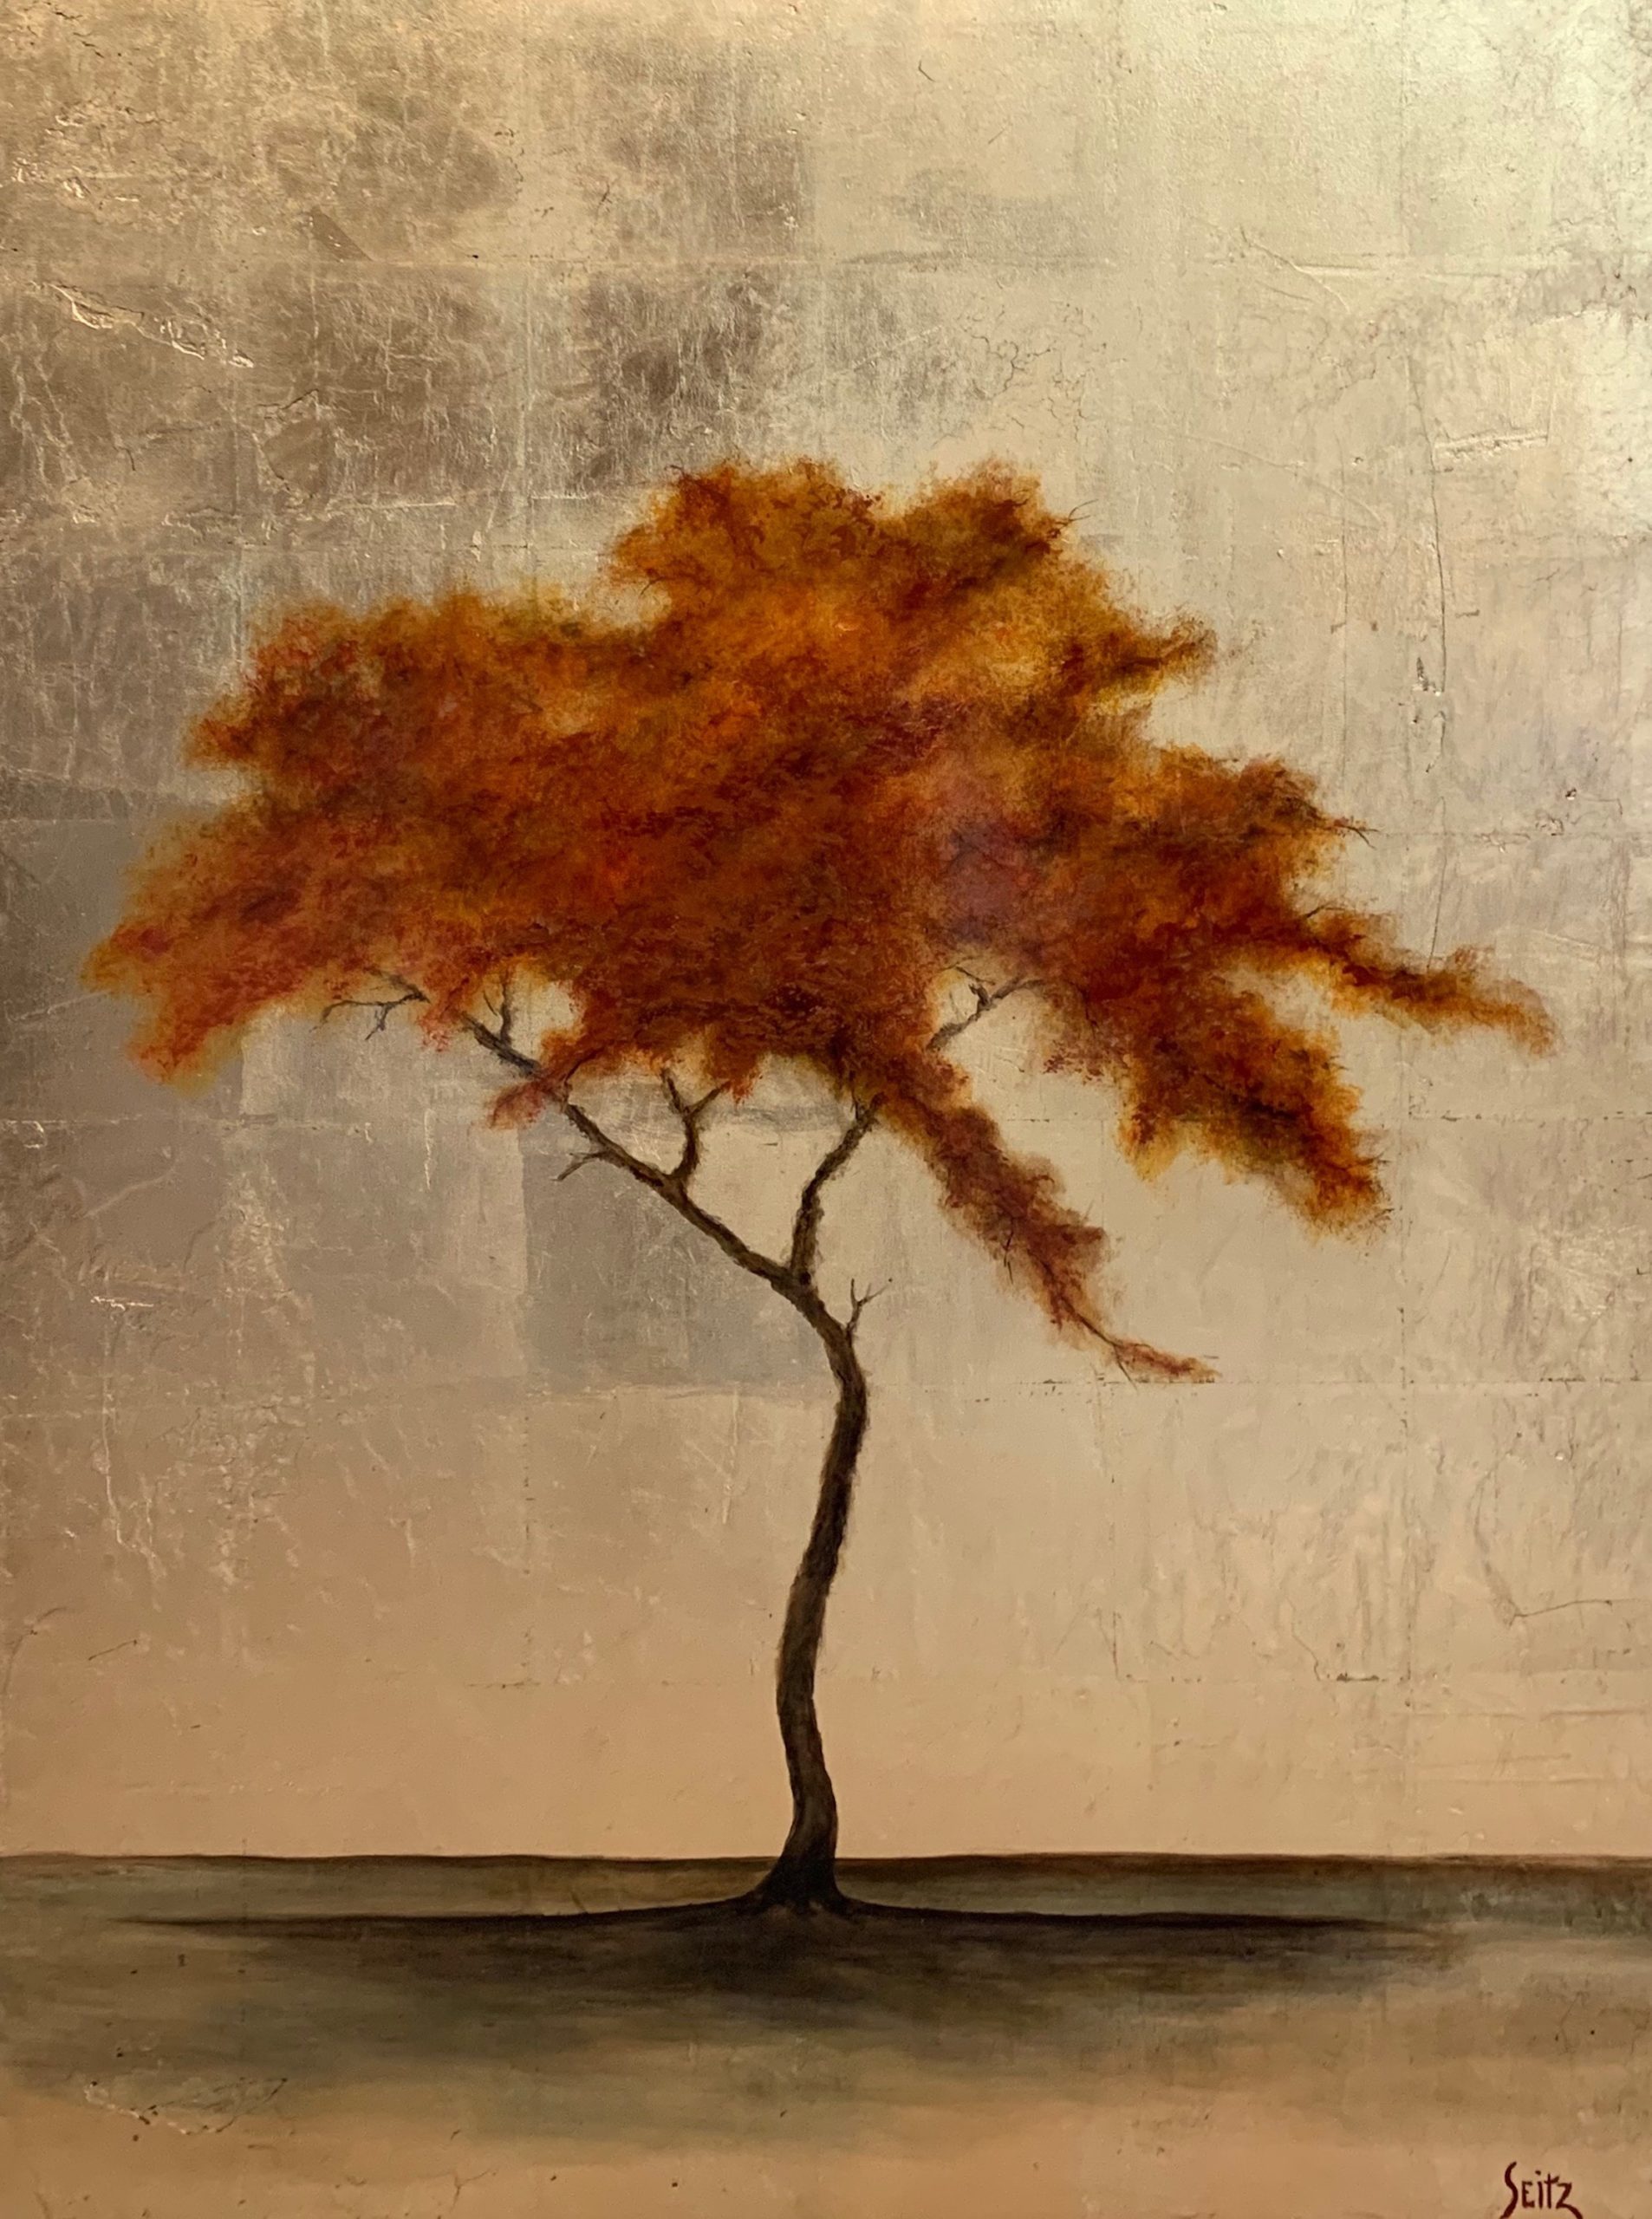 Soaking Up the Sun, II by Jim Seitz, Oil / Metal Leaf, 48 x 36 in., 2020; Pitzer's Fine Arts